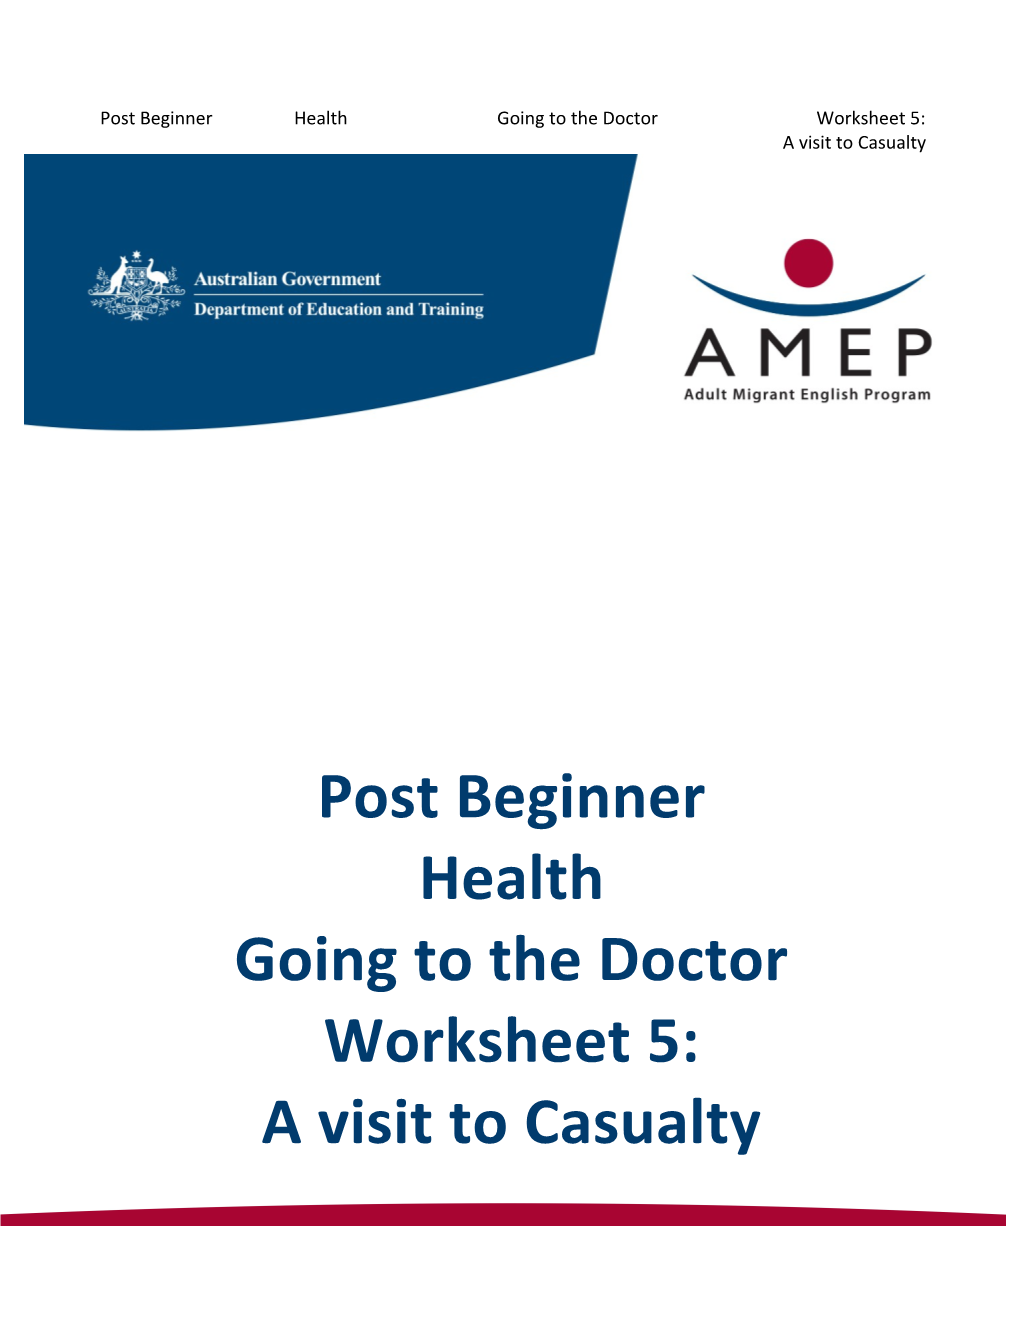 Post Beginner Health Going to the Doctor Worksheet 5: a Visit to Casualty